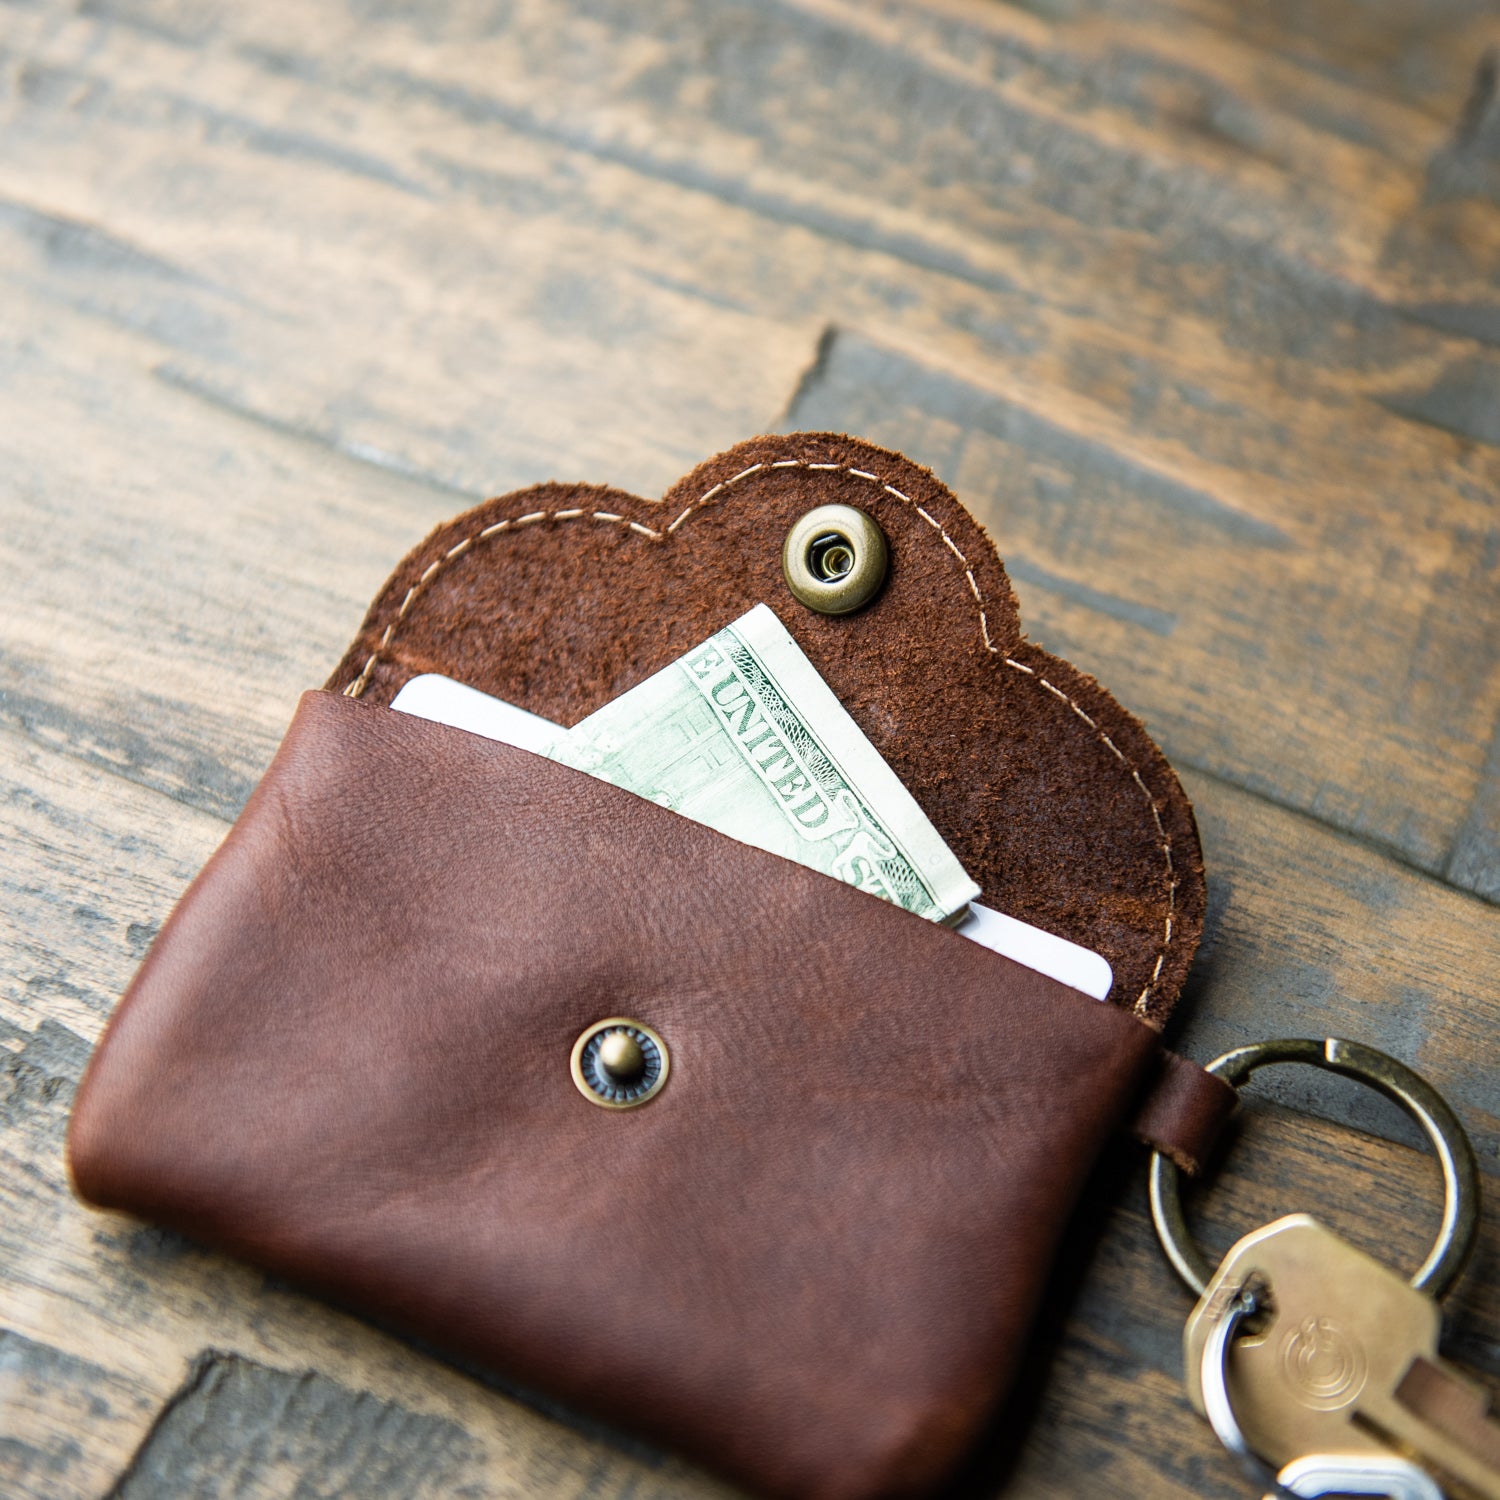 Fine leather scallop keychain wallet with University of North Alabama (UNA) logo